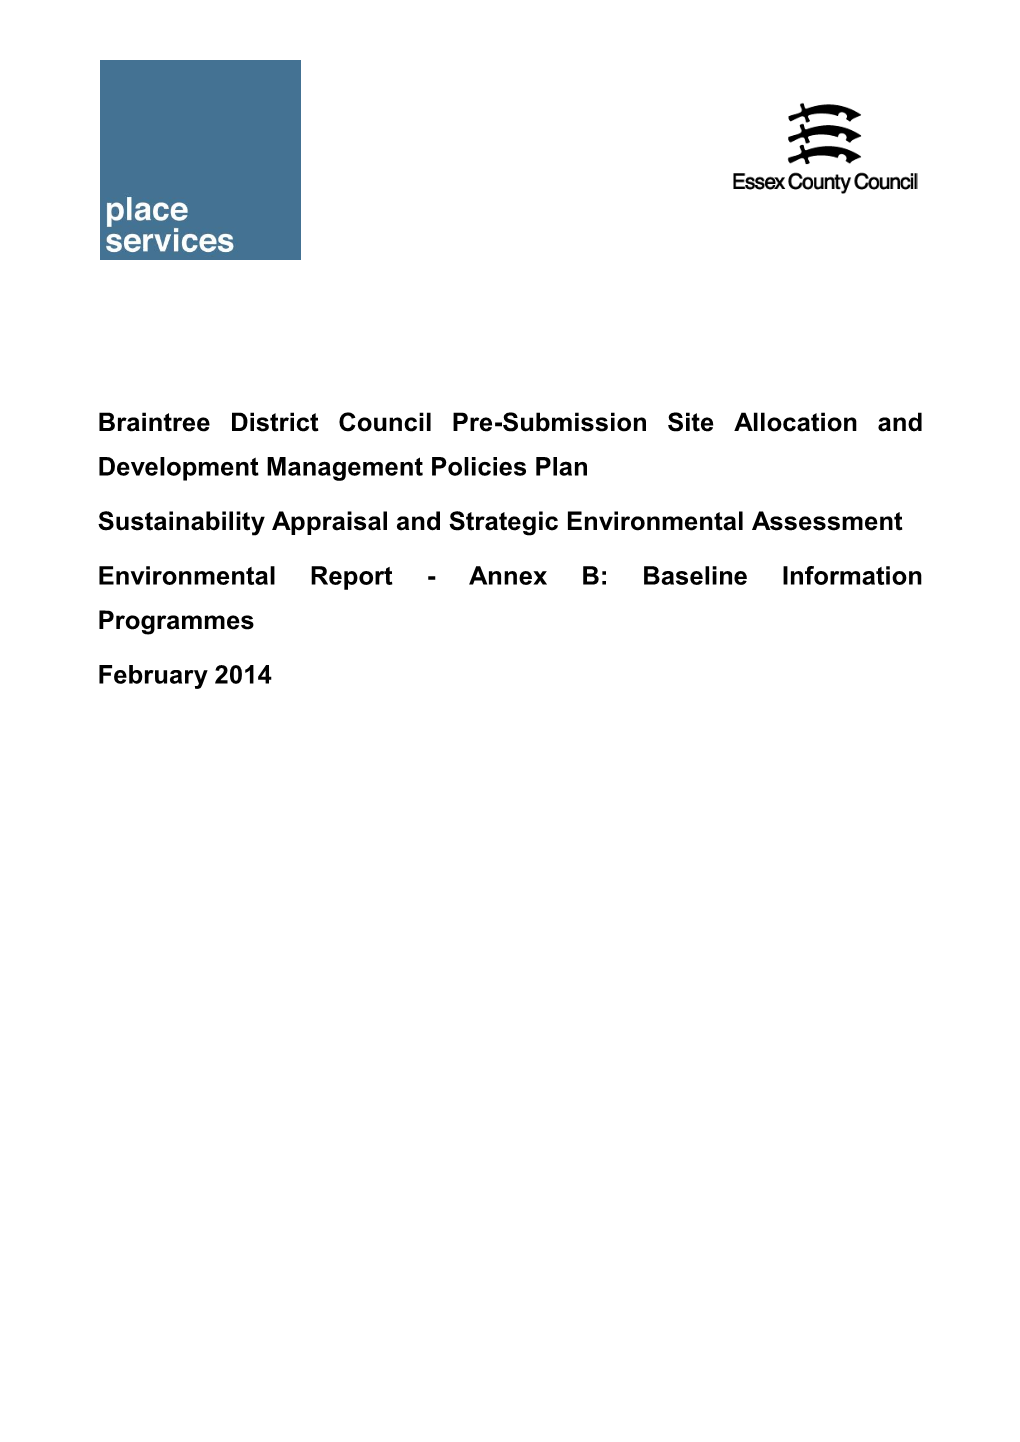 Braintree District Council Pre-Submission Site Allocation and Development Management Policies Plan Sustainability Appraisal